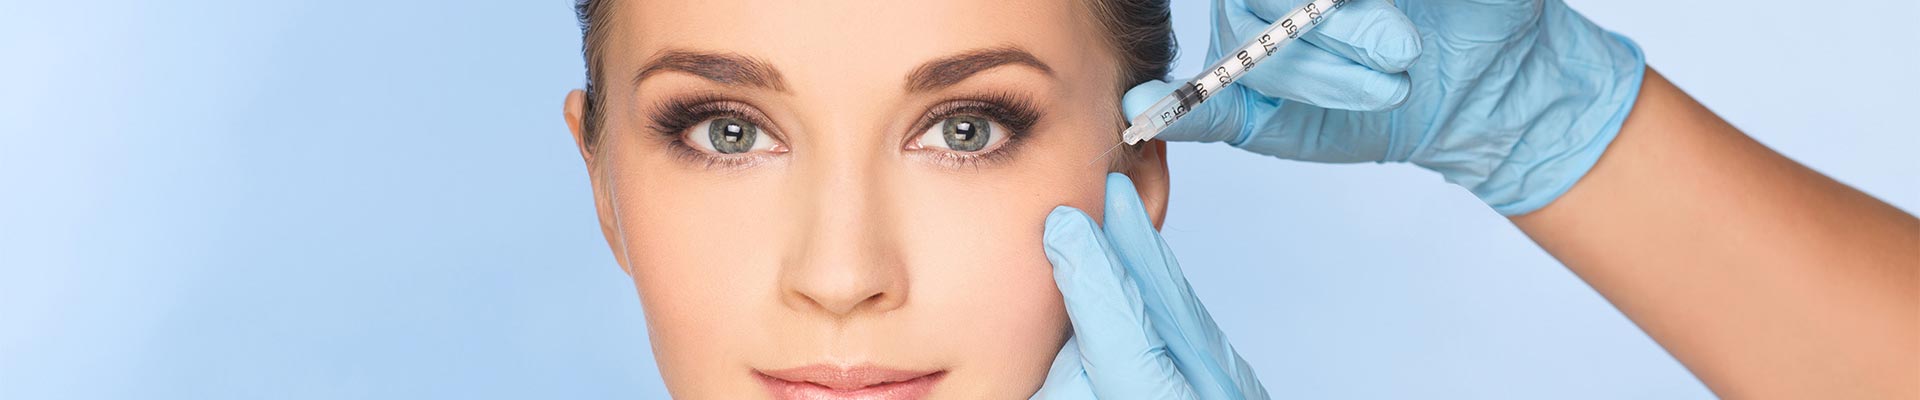 BOTOX Cosmetic treatments Banner Image